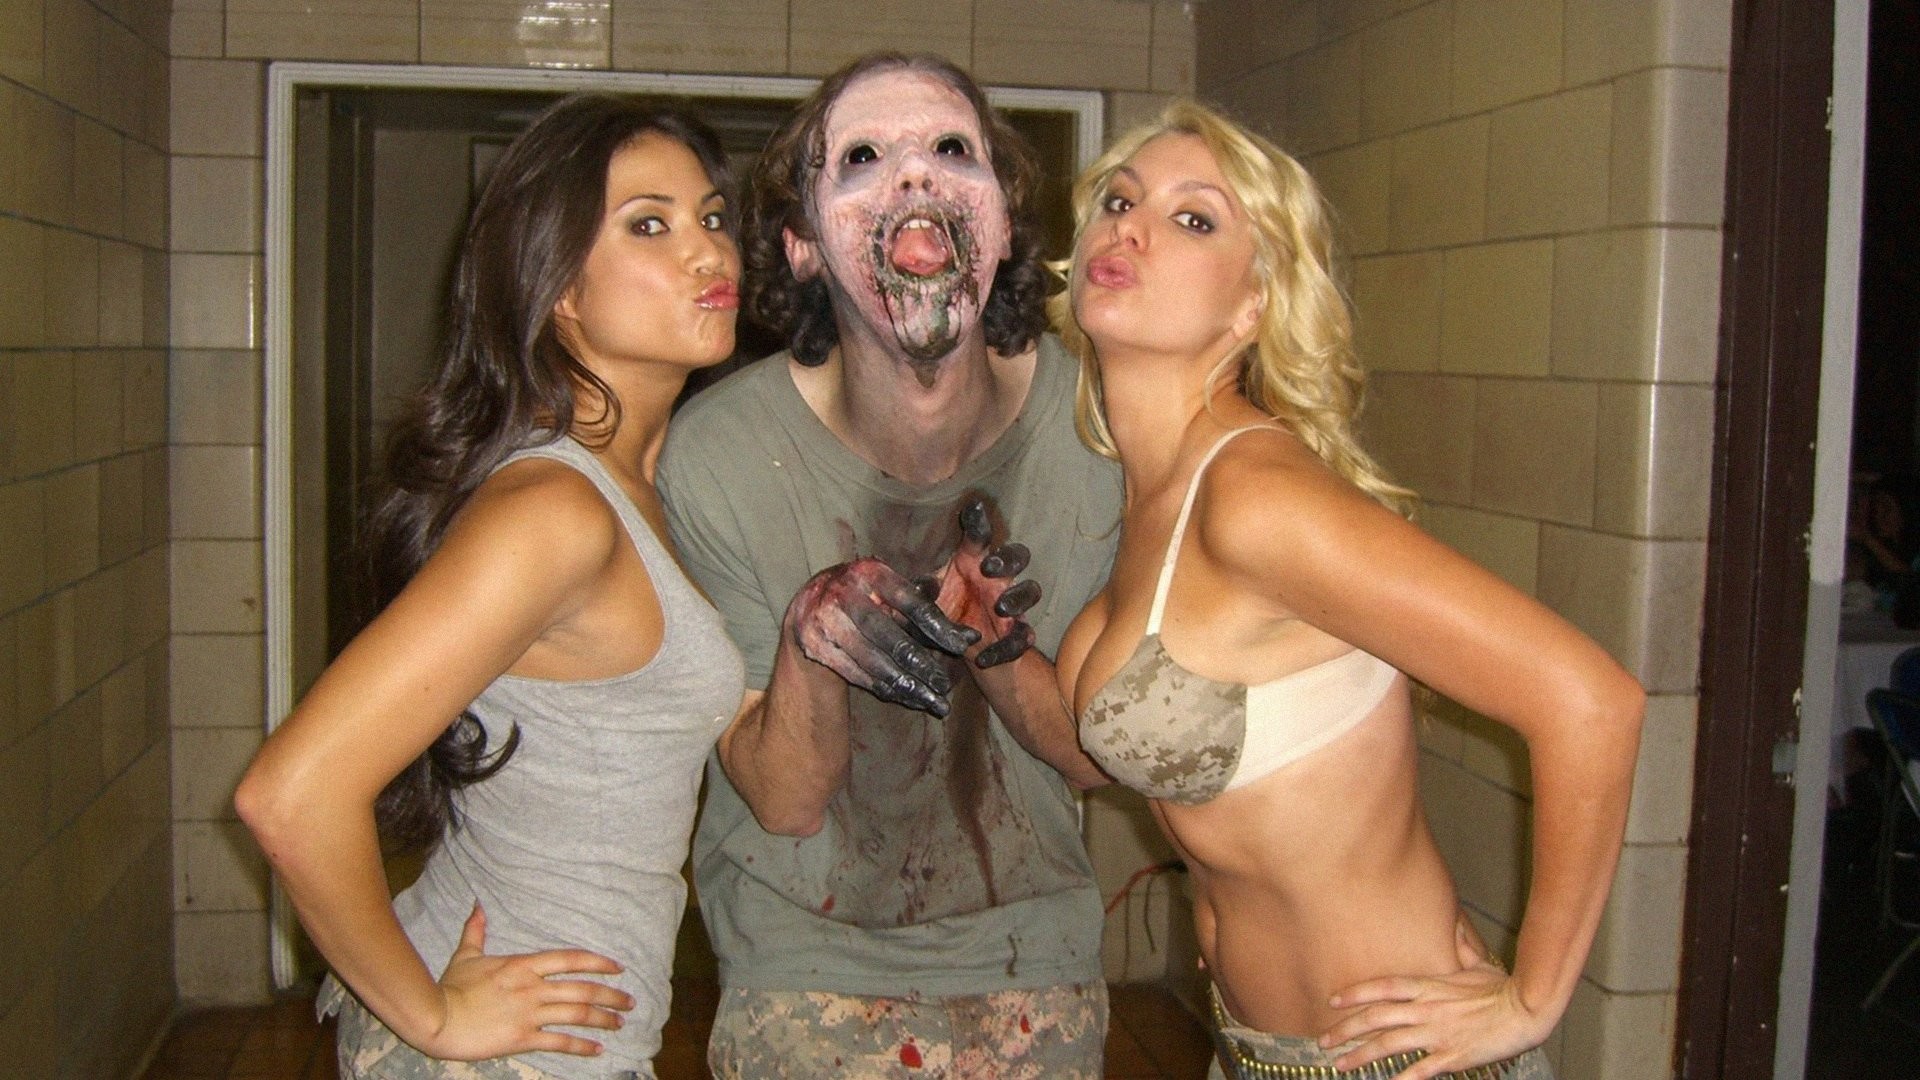 Movie Zombie Strippers HD Wallpaper | Background Image